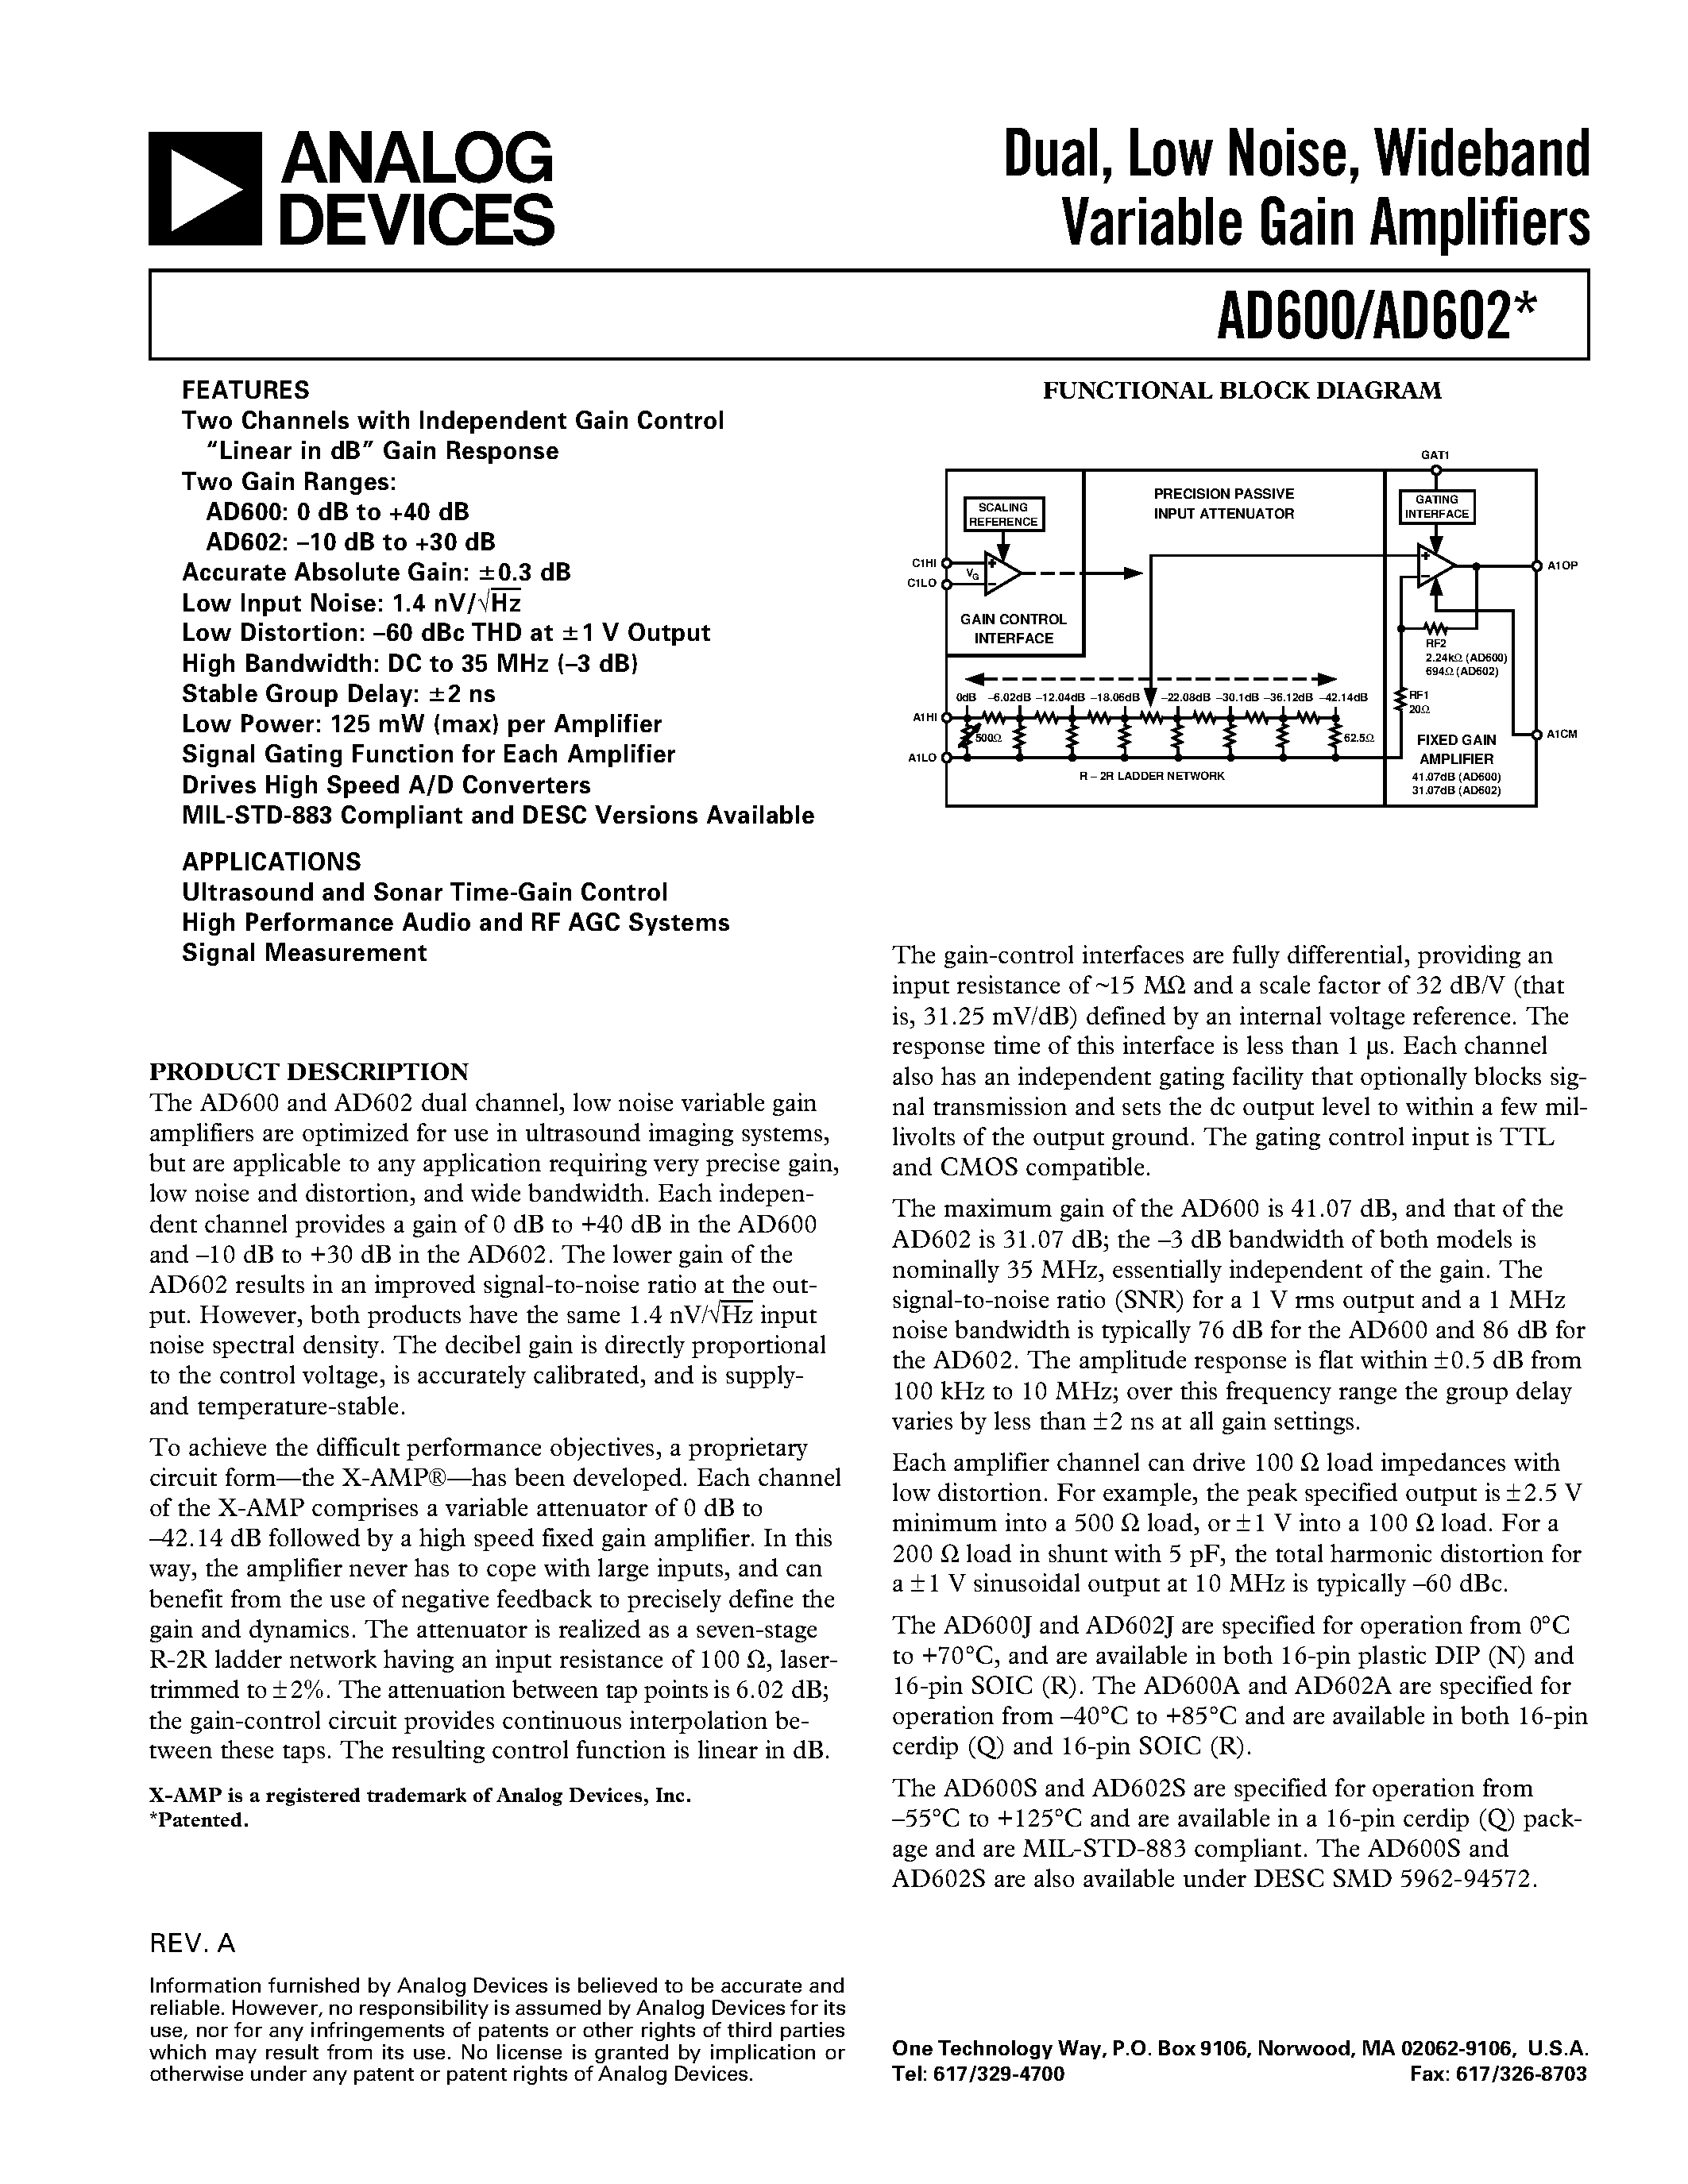 Datasheet AD600JN - Dual/ Low Noise/ Wideband Variable Gain Amplifiers page 1